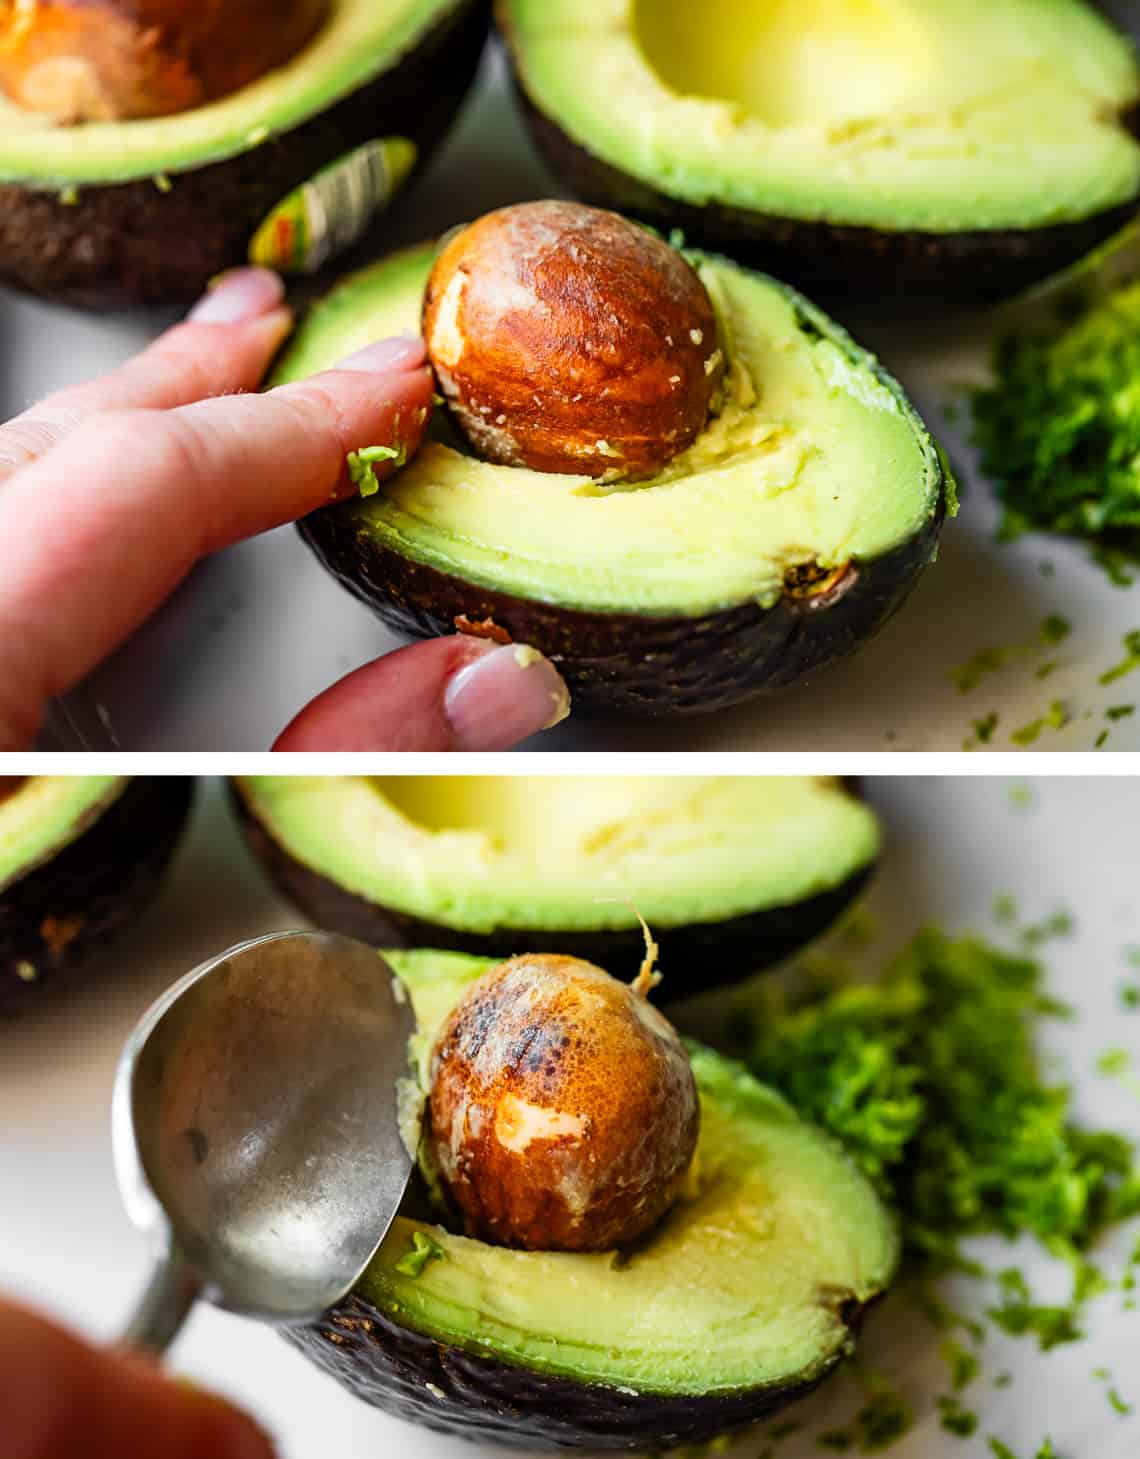 top using a finger to pop out the avocado pit, bottom using the spoon to pop out the pit.